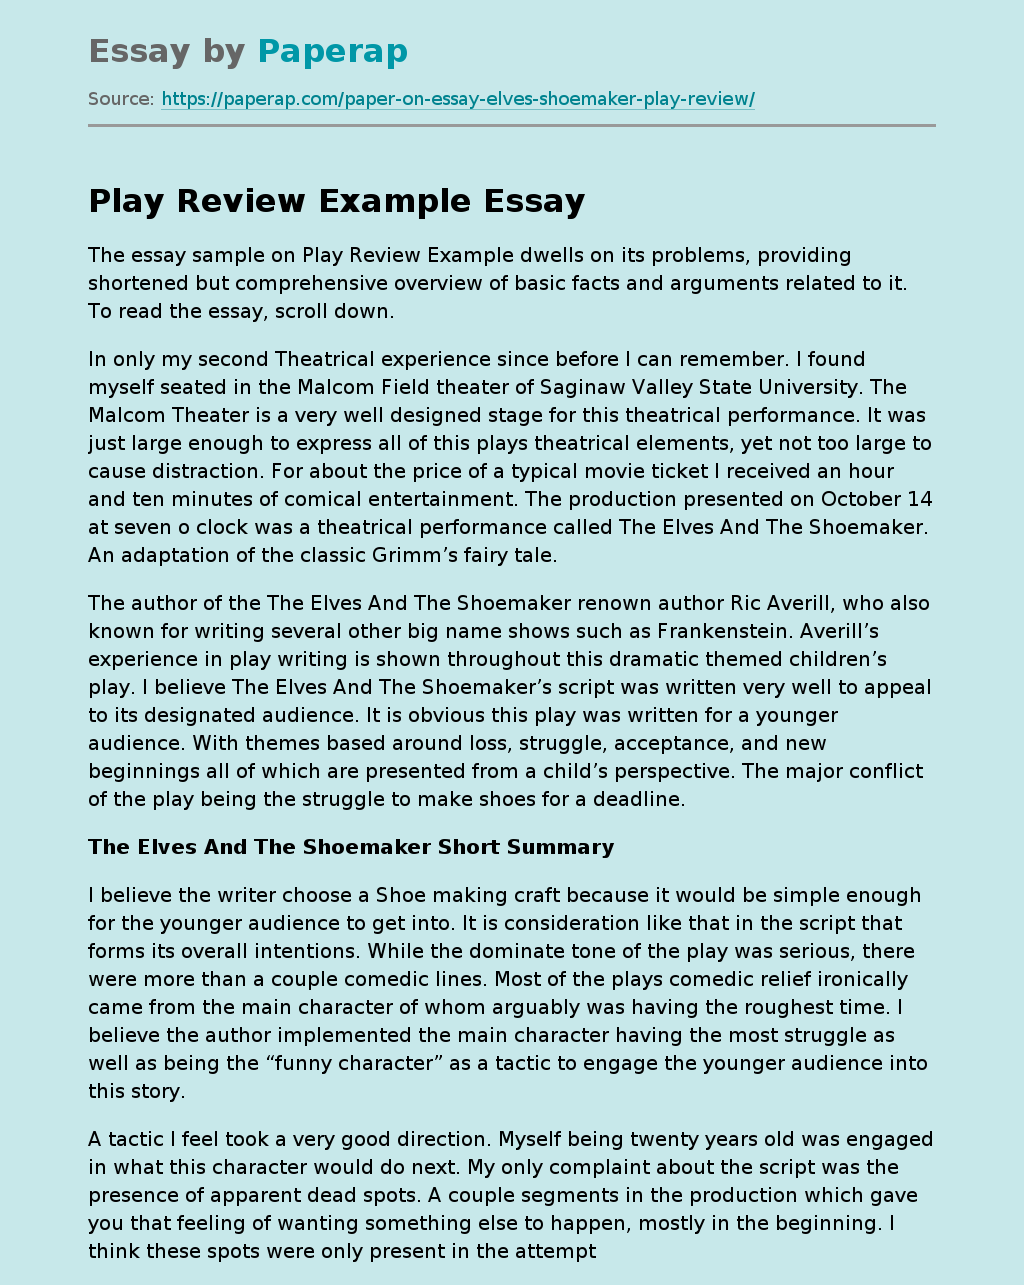 Play Review Example